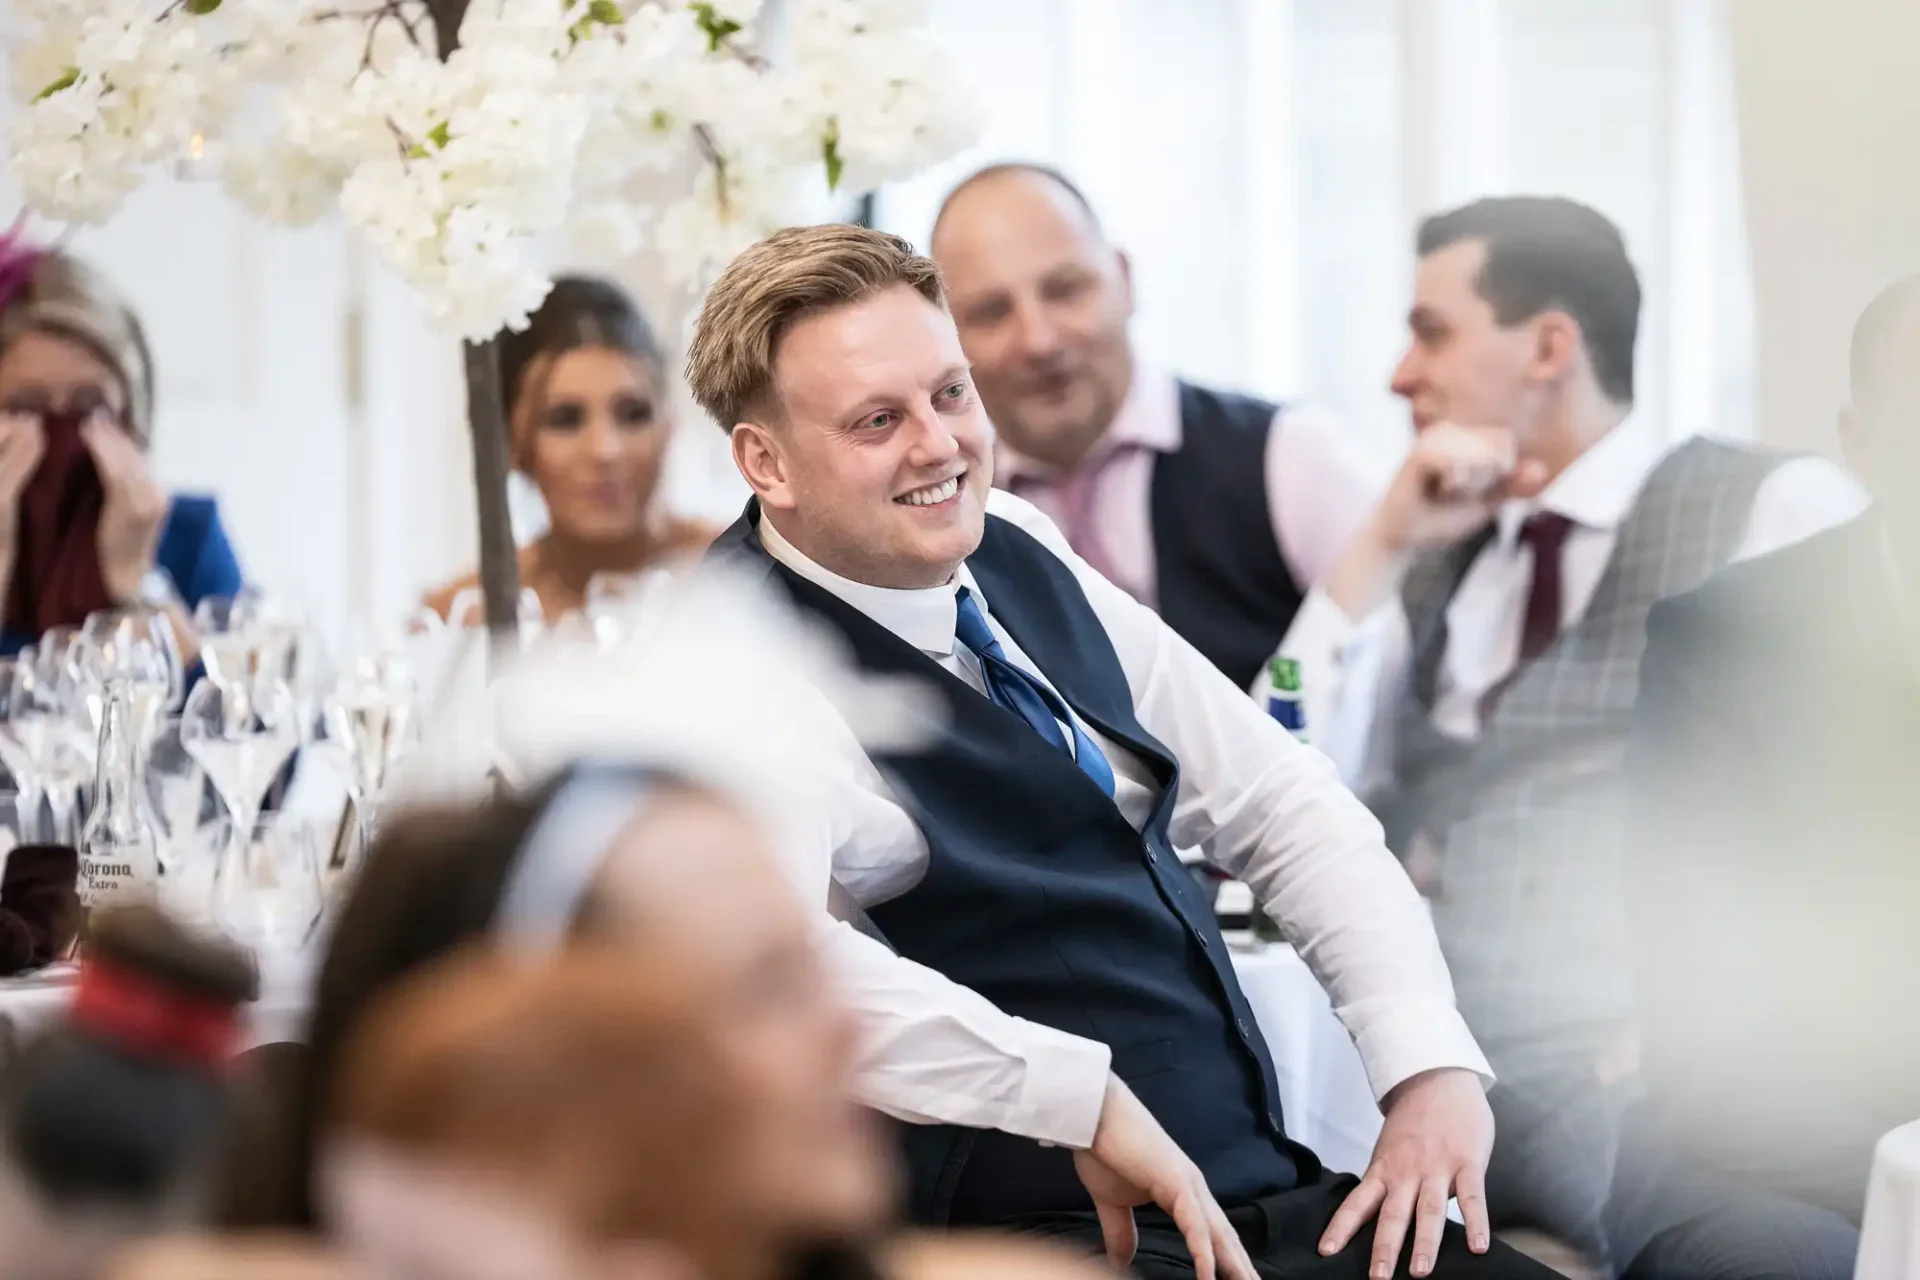 A smiling man in a vest at a wedding reception, surrounded by guests, with focus on his joyful expression.